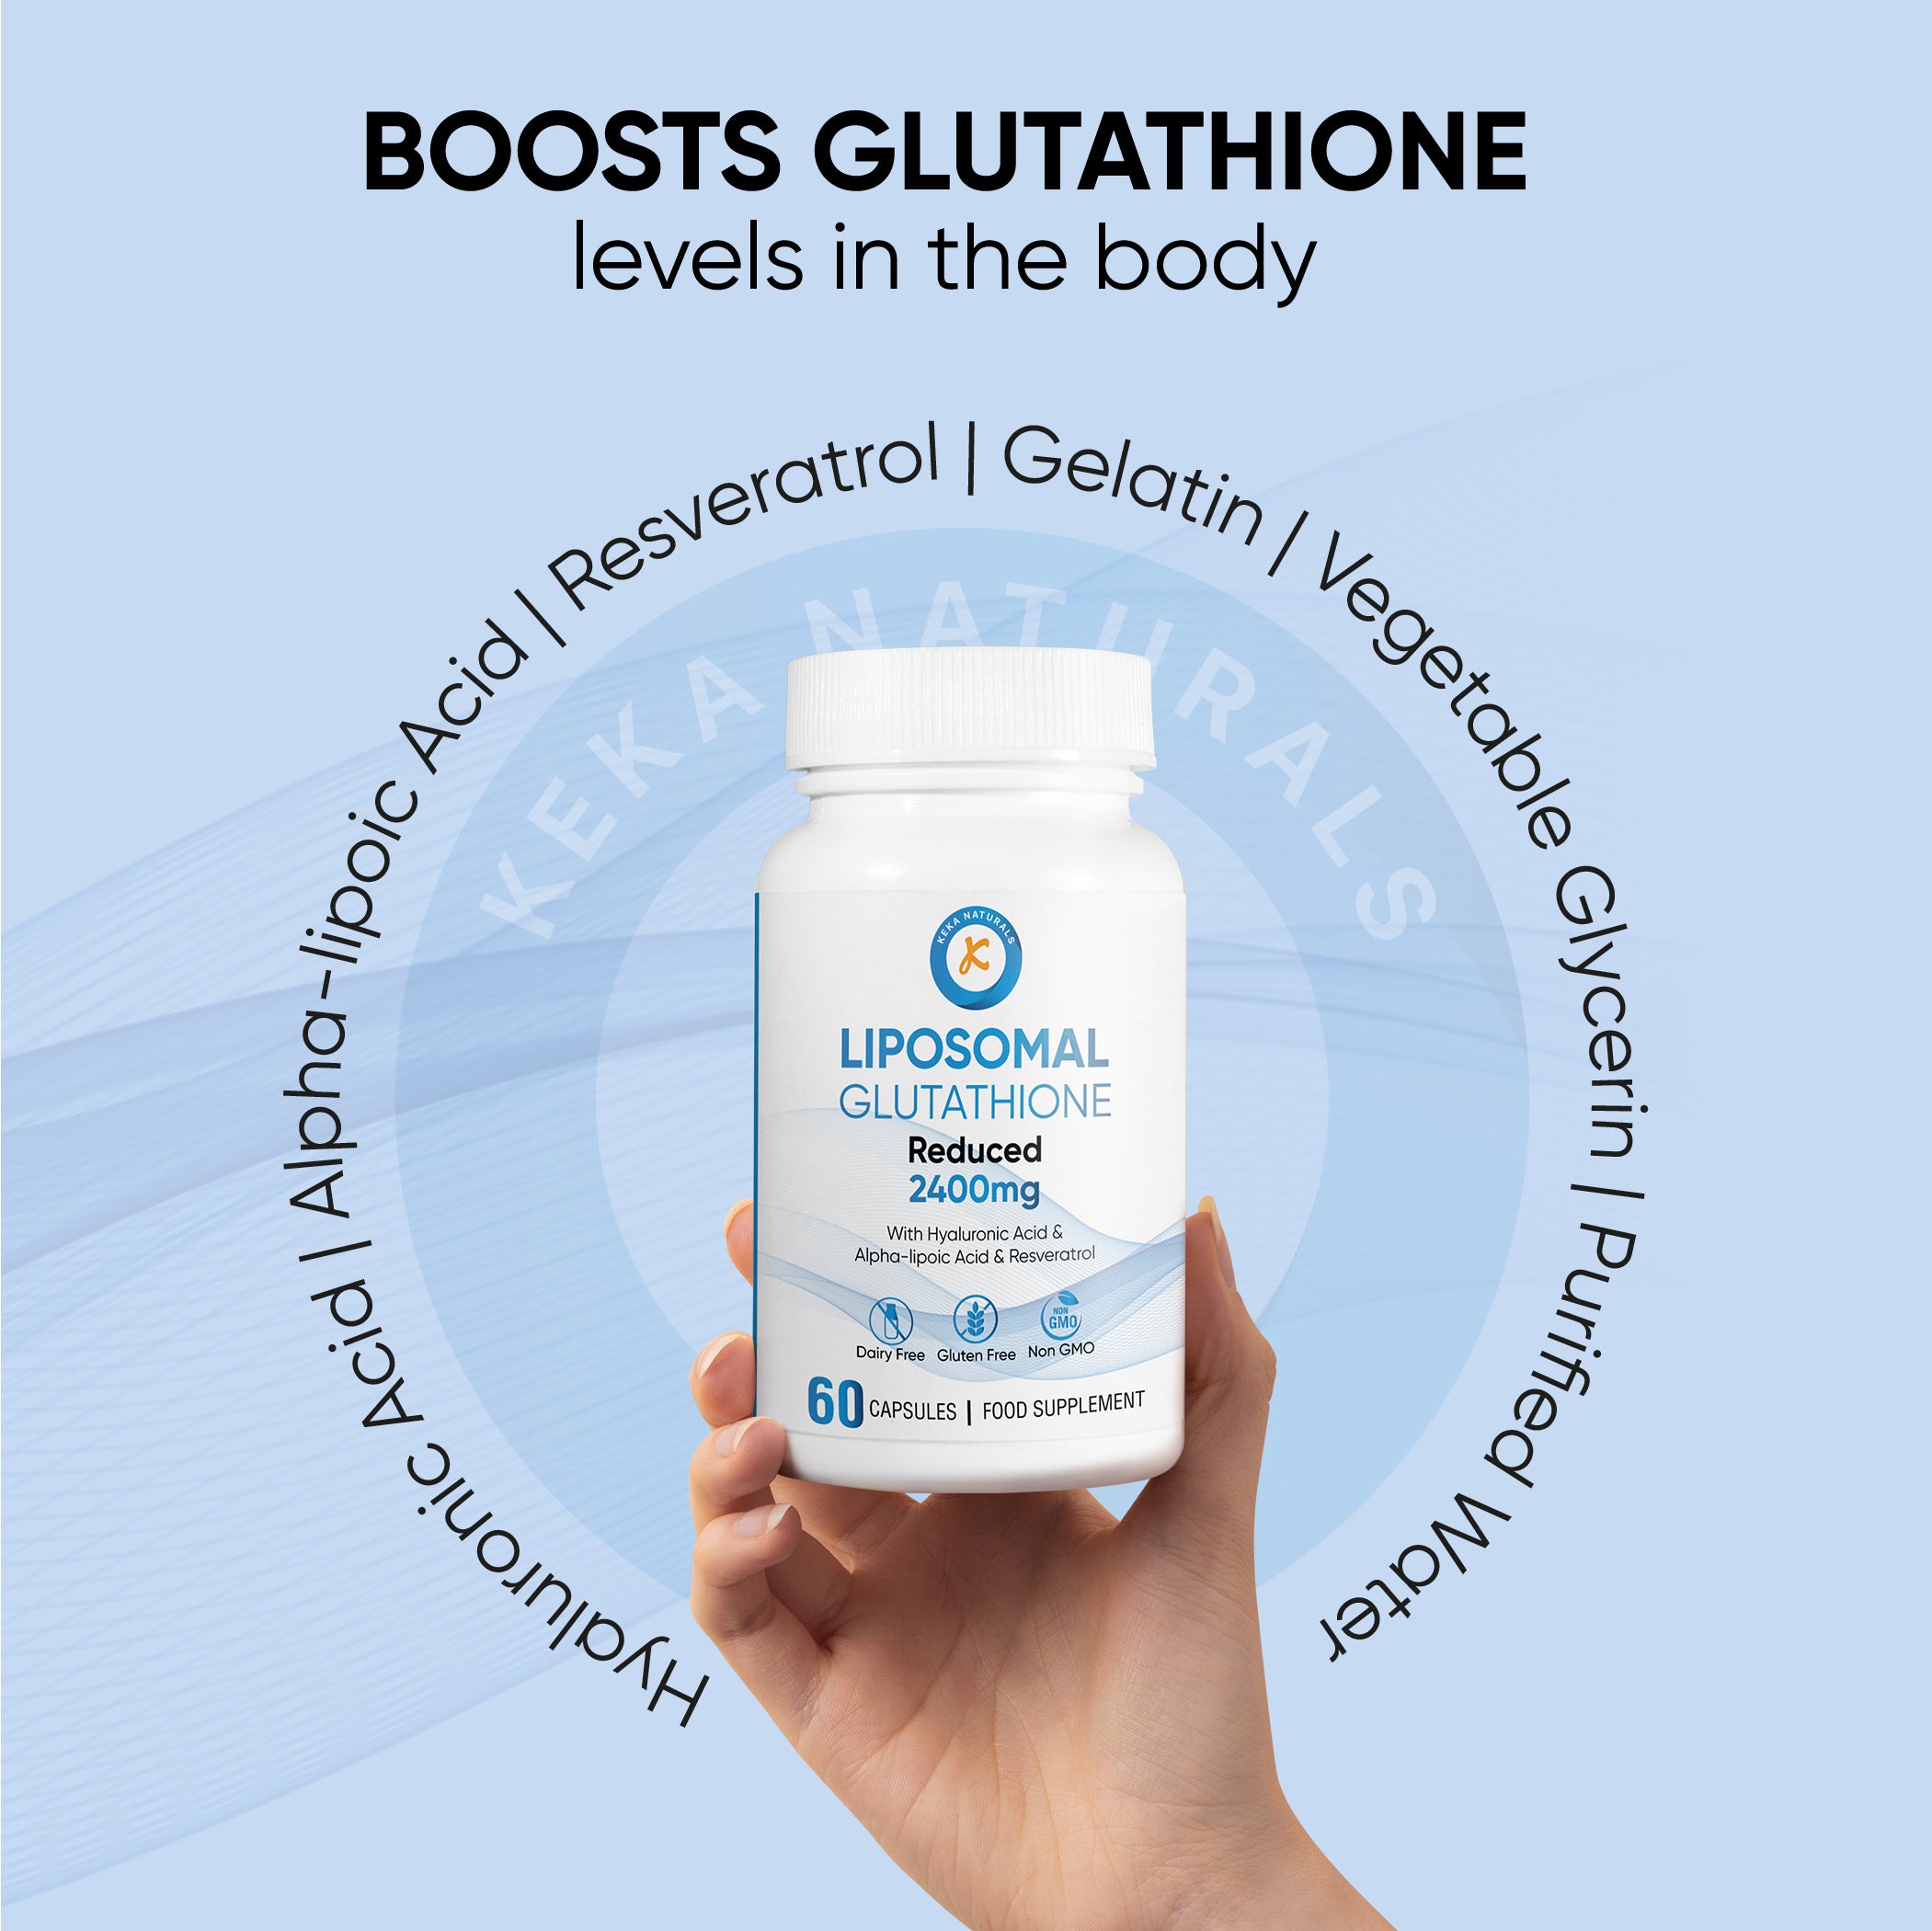 liposomal glutathione reduced with hyaluronic acid and alpha lipolic acid and resveratrol to boost glutathione levels in the body